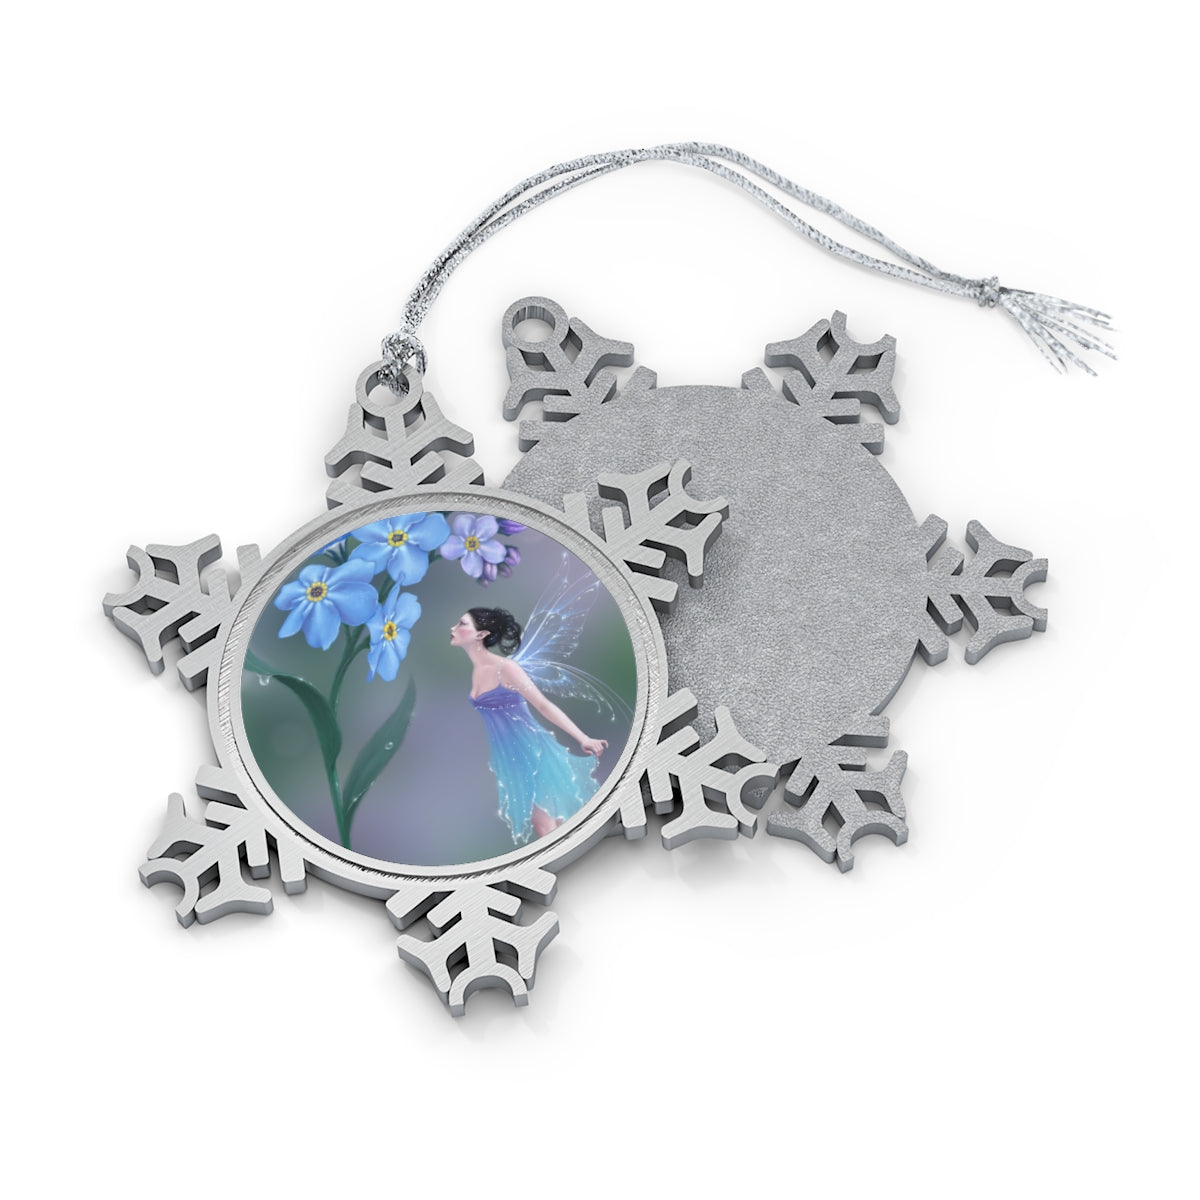 Snowflake Ornament - Forget-Me-Not